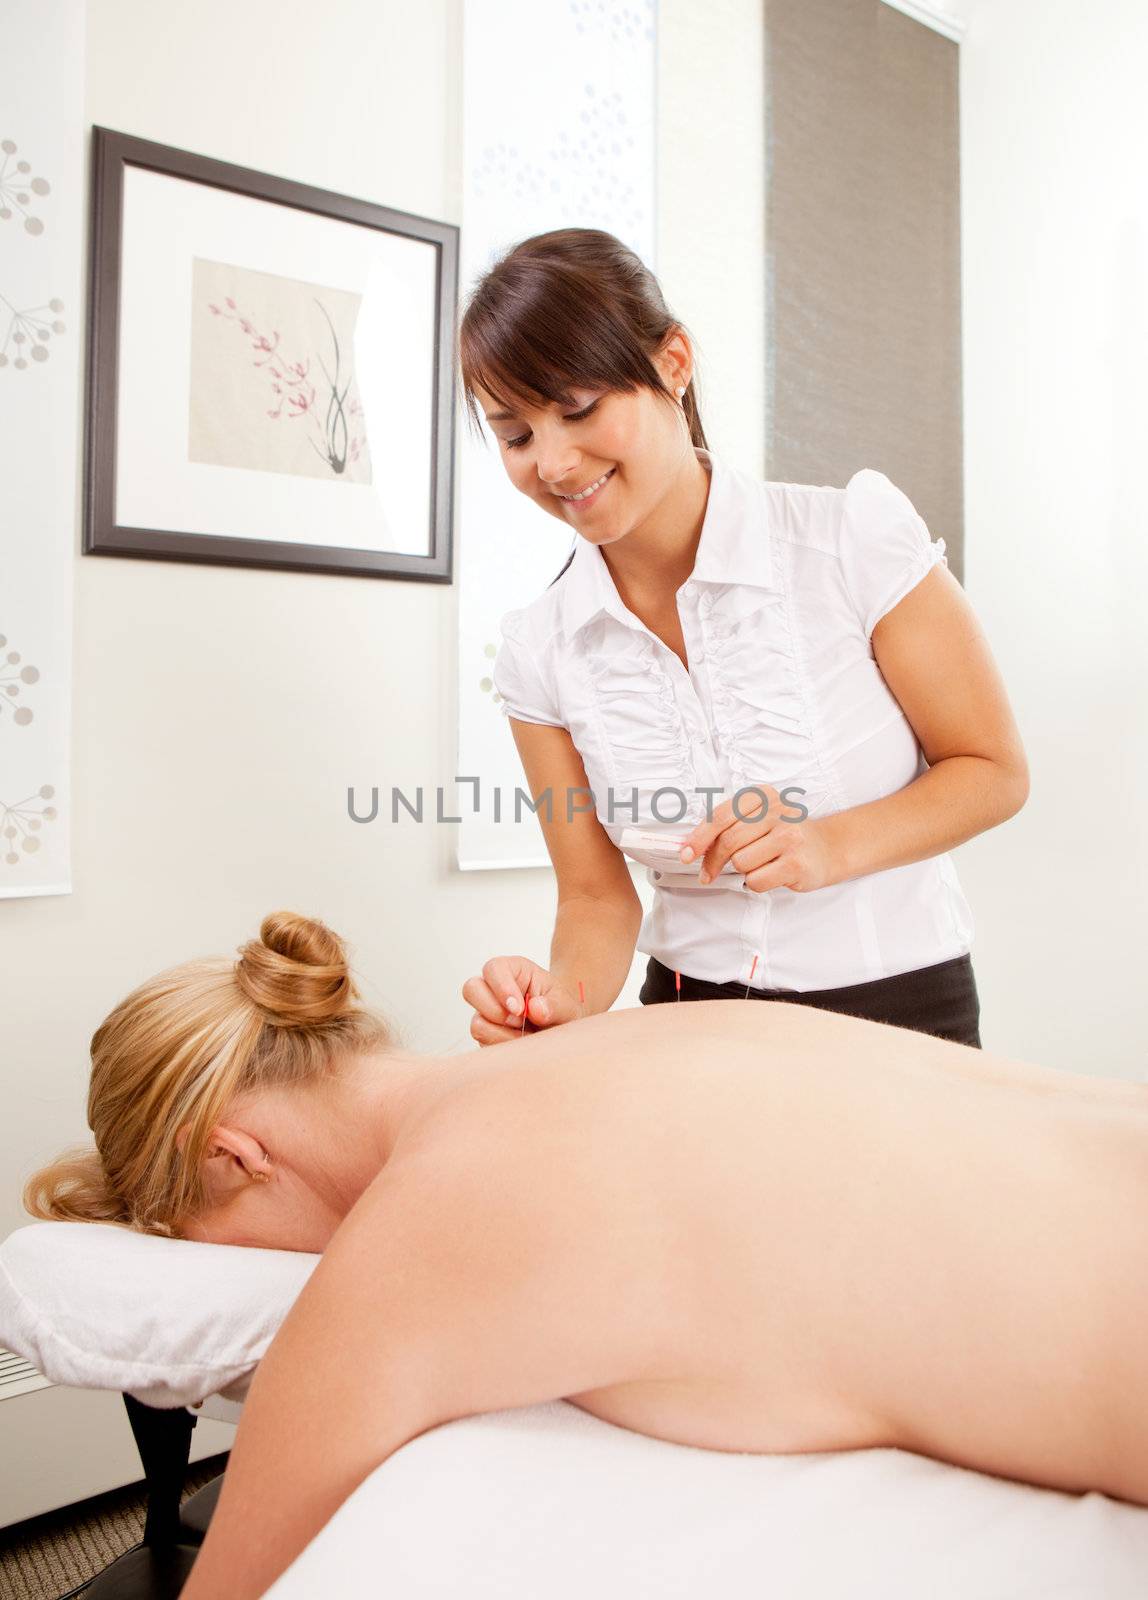 A woman acupuncturist performing a back treatment on a female pasient.